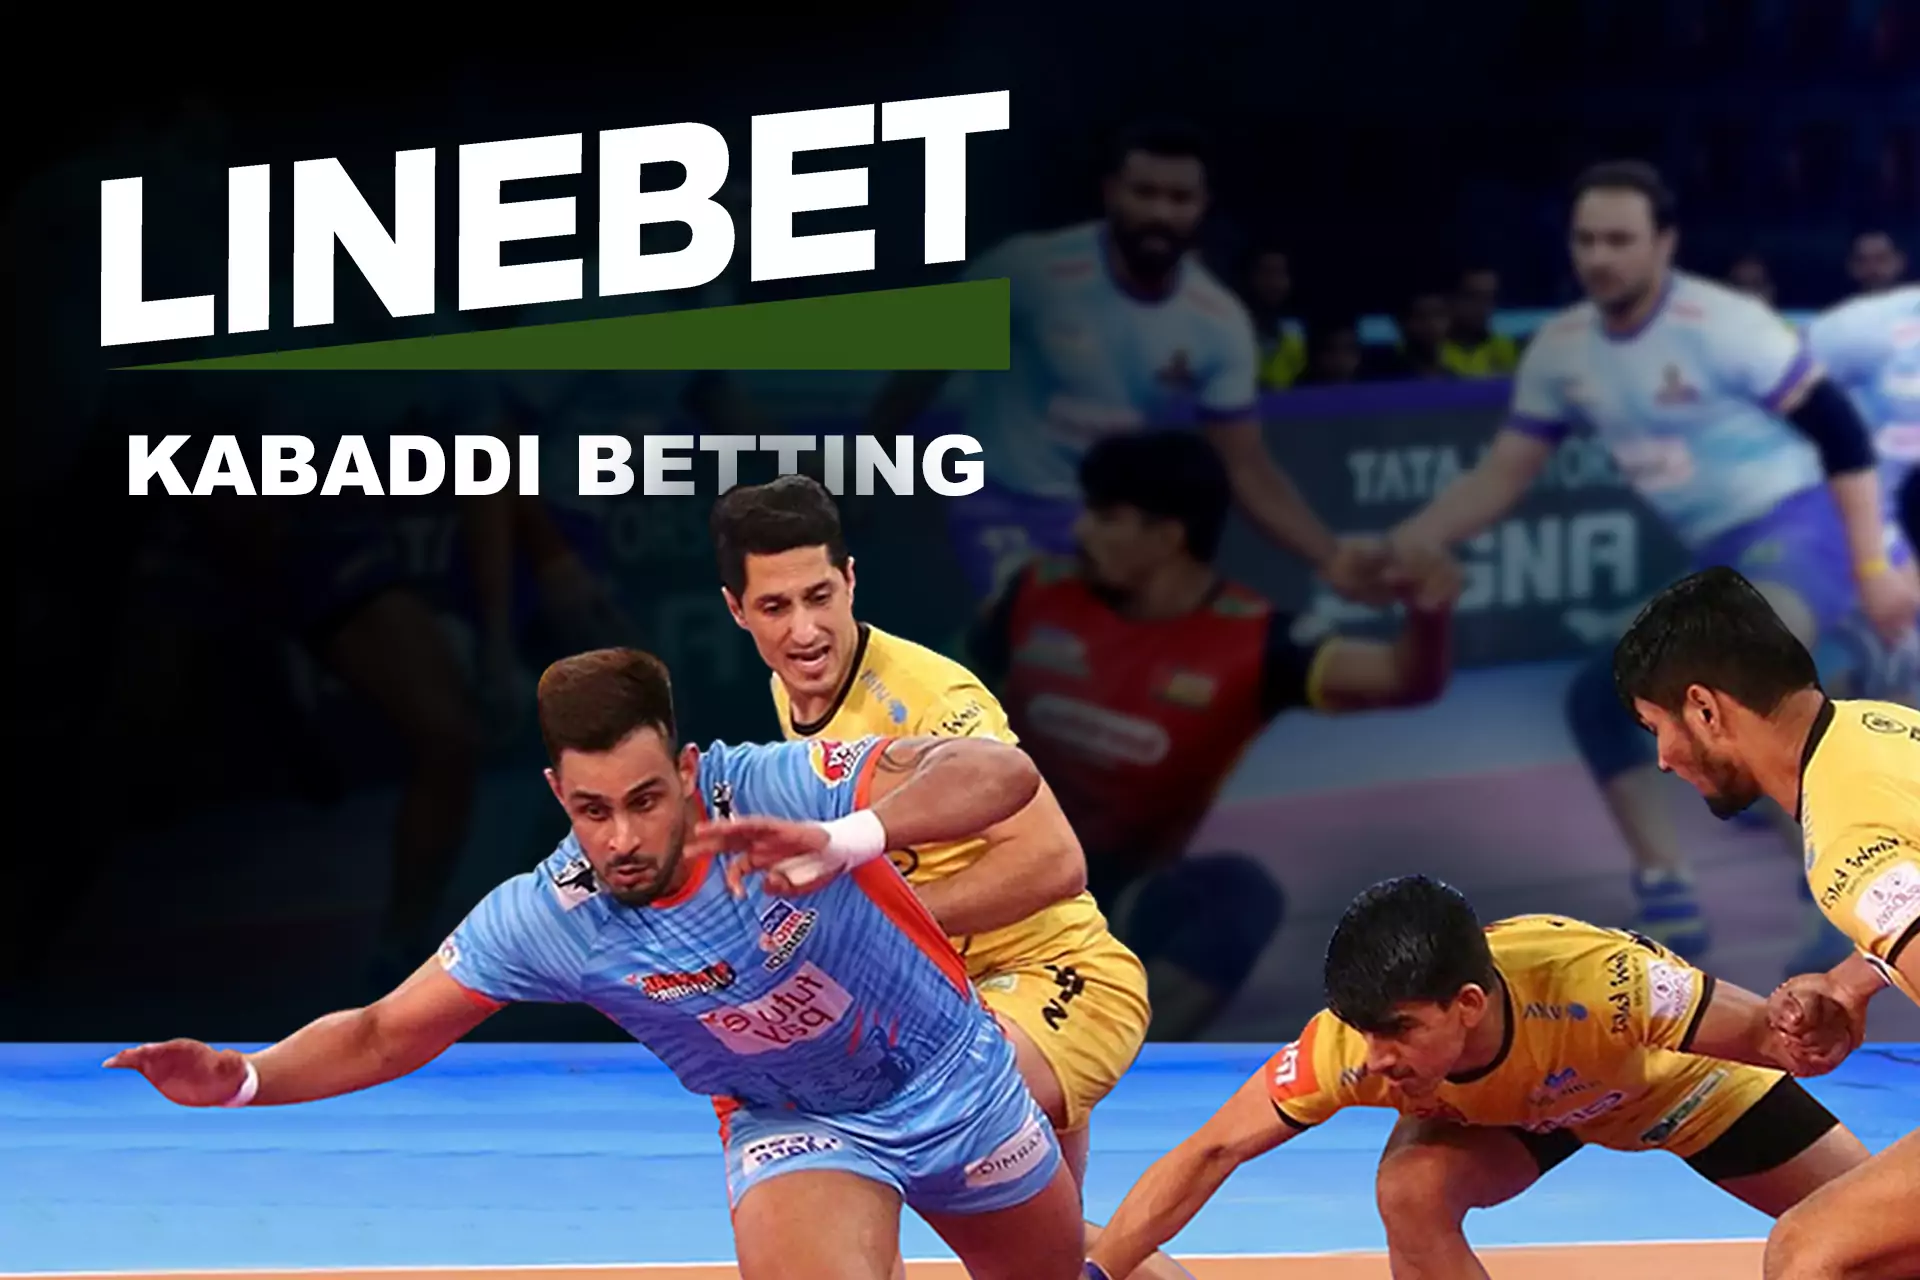 Kabaddi is one of the most popular sports disciplines in the Linebet app.